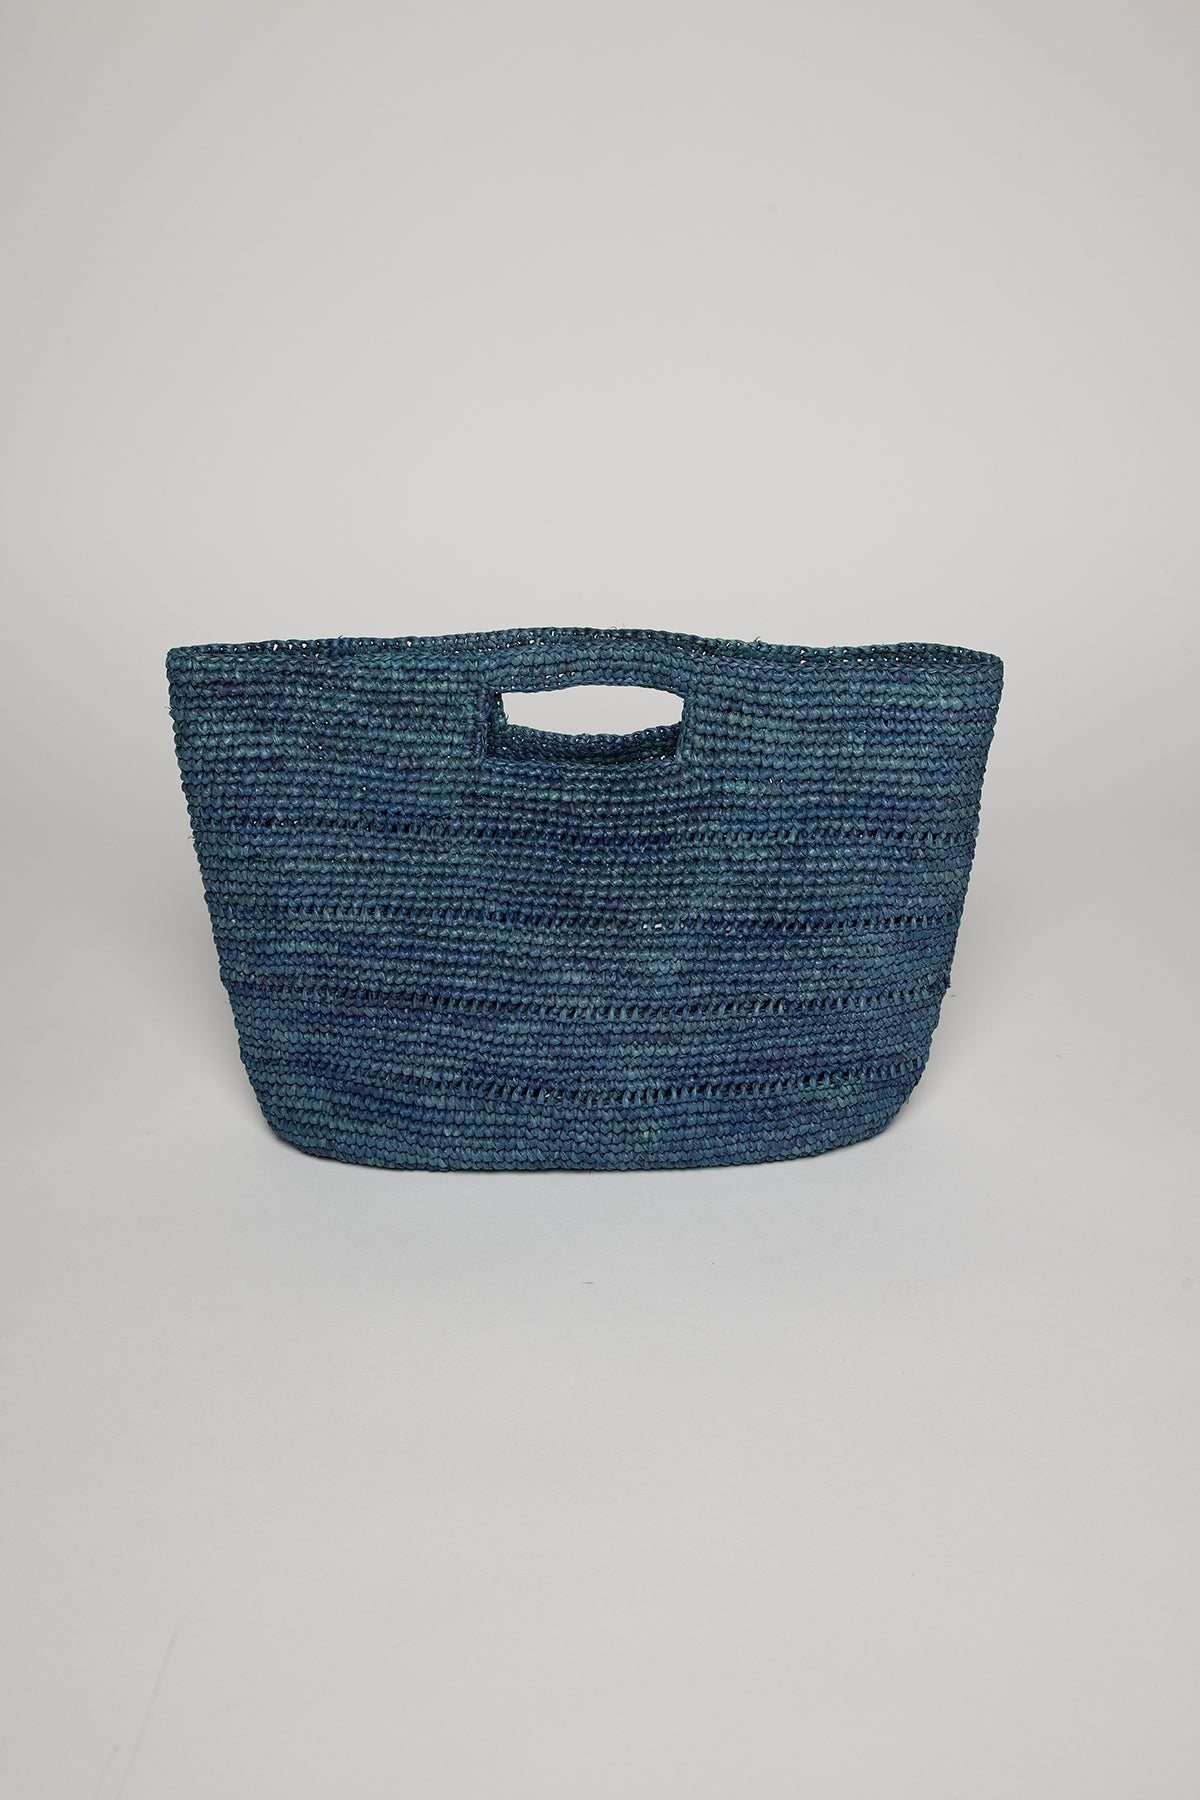 A blue Velvet by Graham & Spencer raffia straw basket with curved sides and an integrated handle, displayed against a white background.-36571449491649